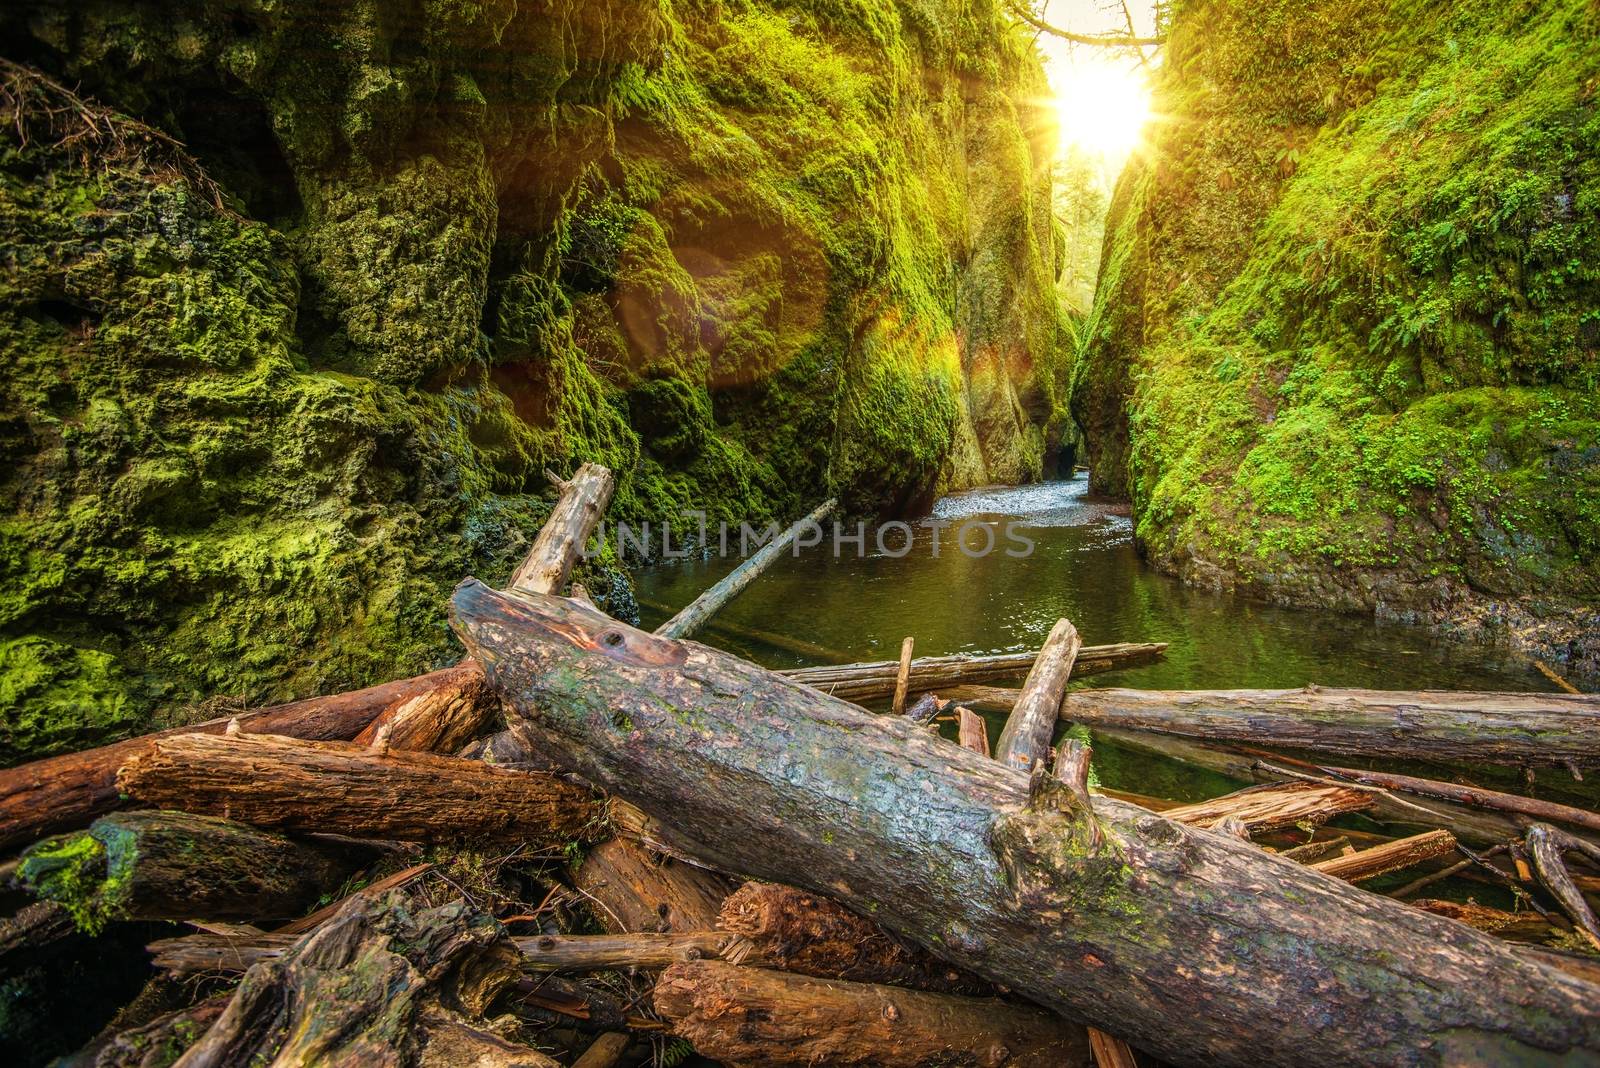 Mossy Scenic Columbia River Gorge Landscape. Mossy Canyon with Massive Wood Logs Pile. Oregon, United States. 